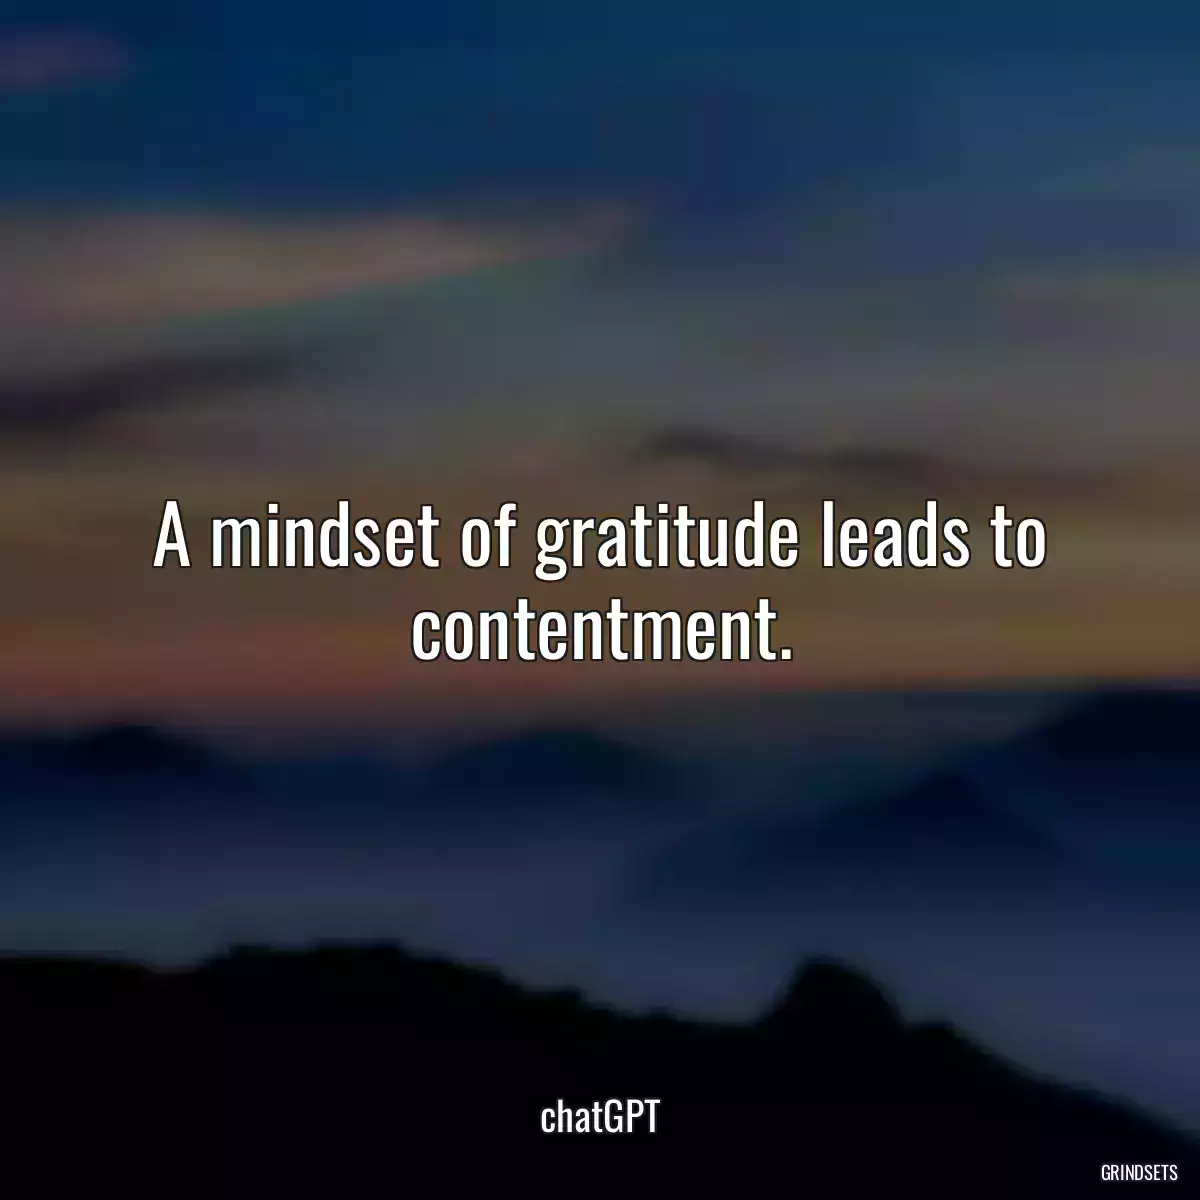 A mindset of gratitude leads to contentment.